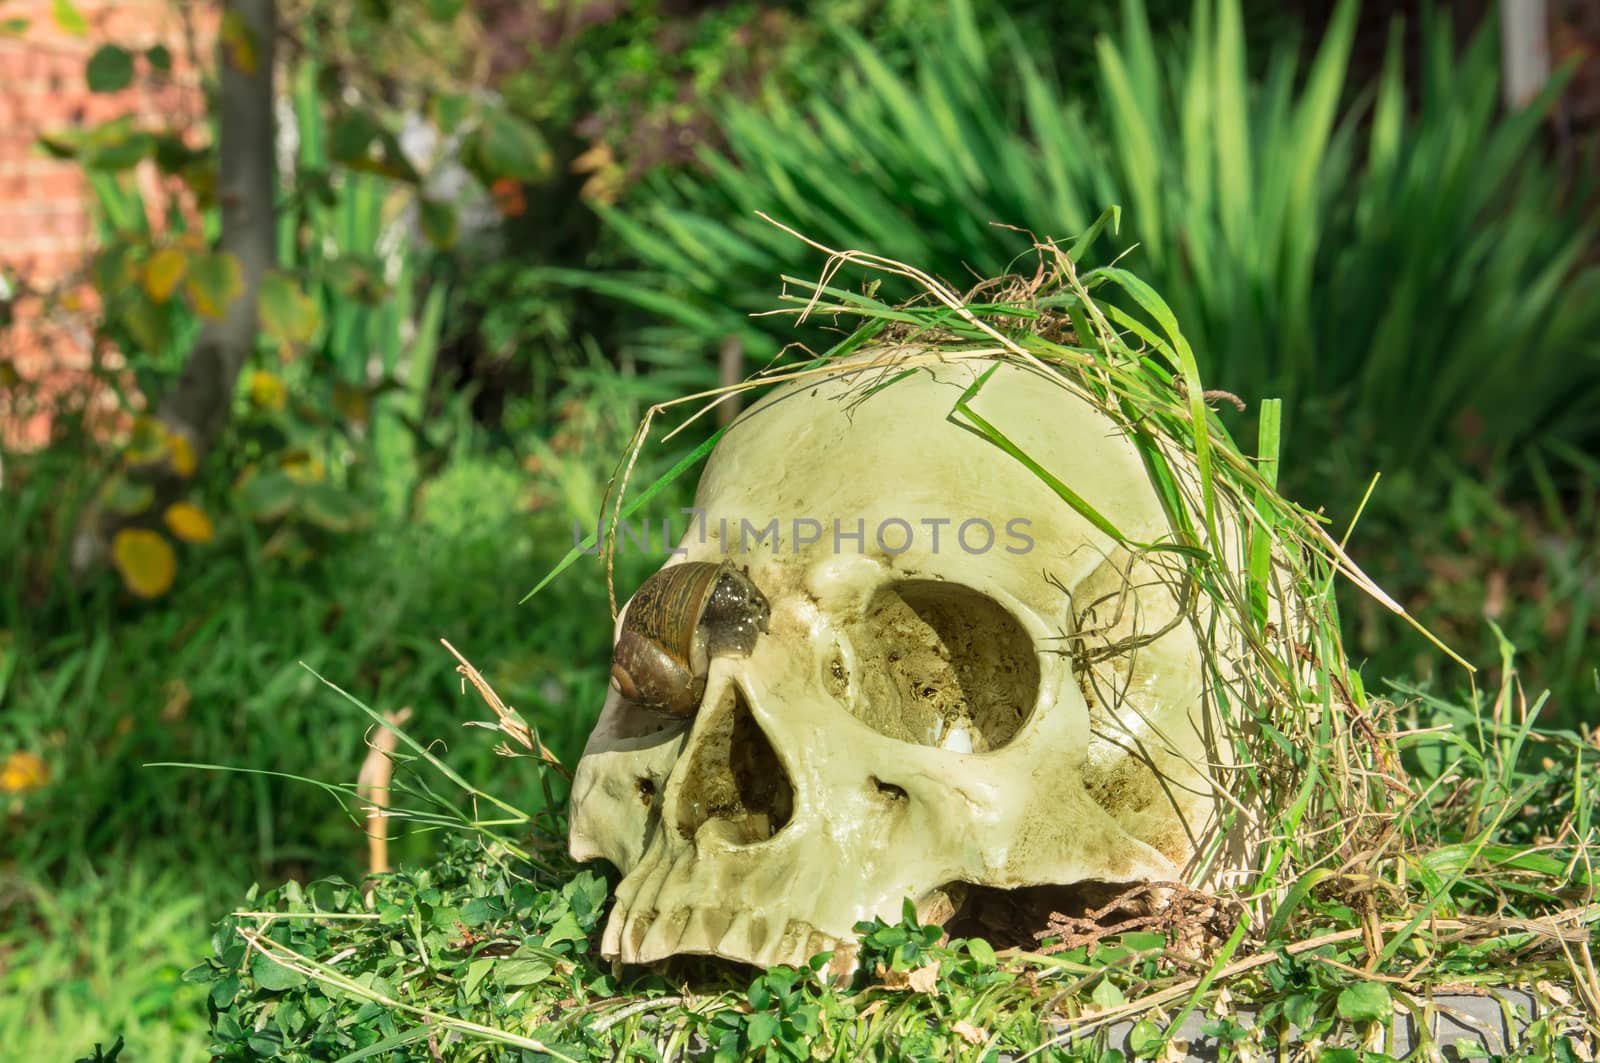 still life skull in the garden at the backyard of the house